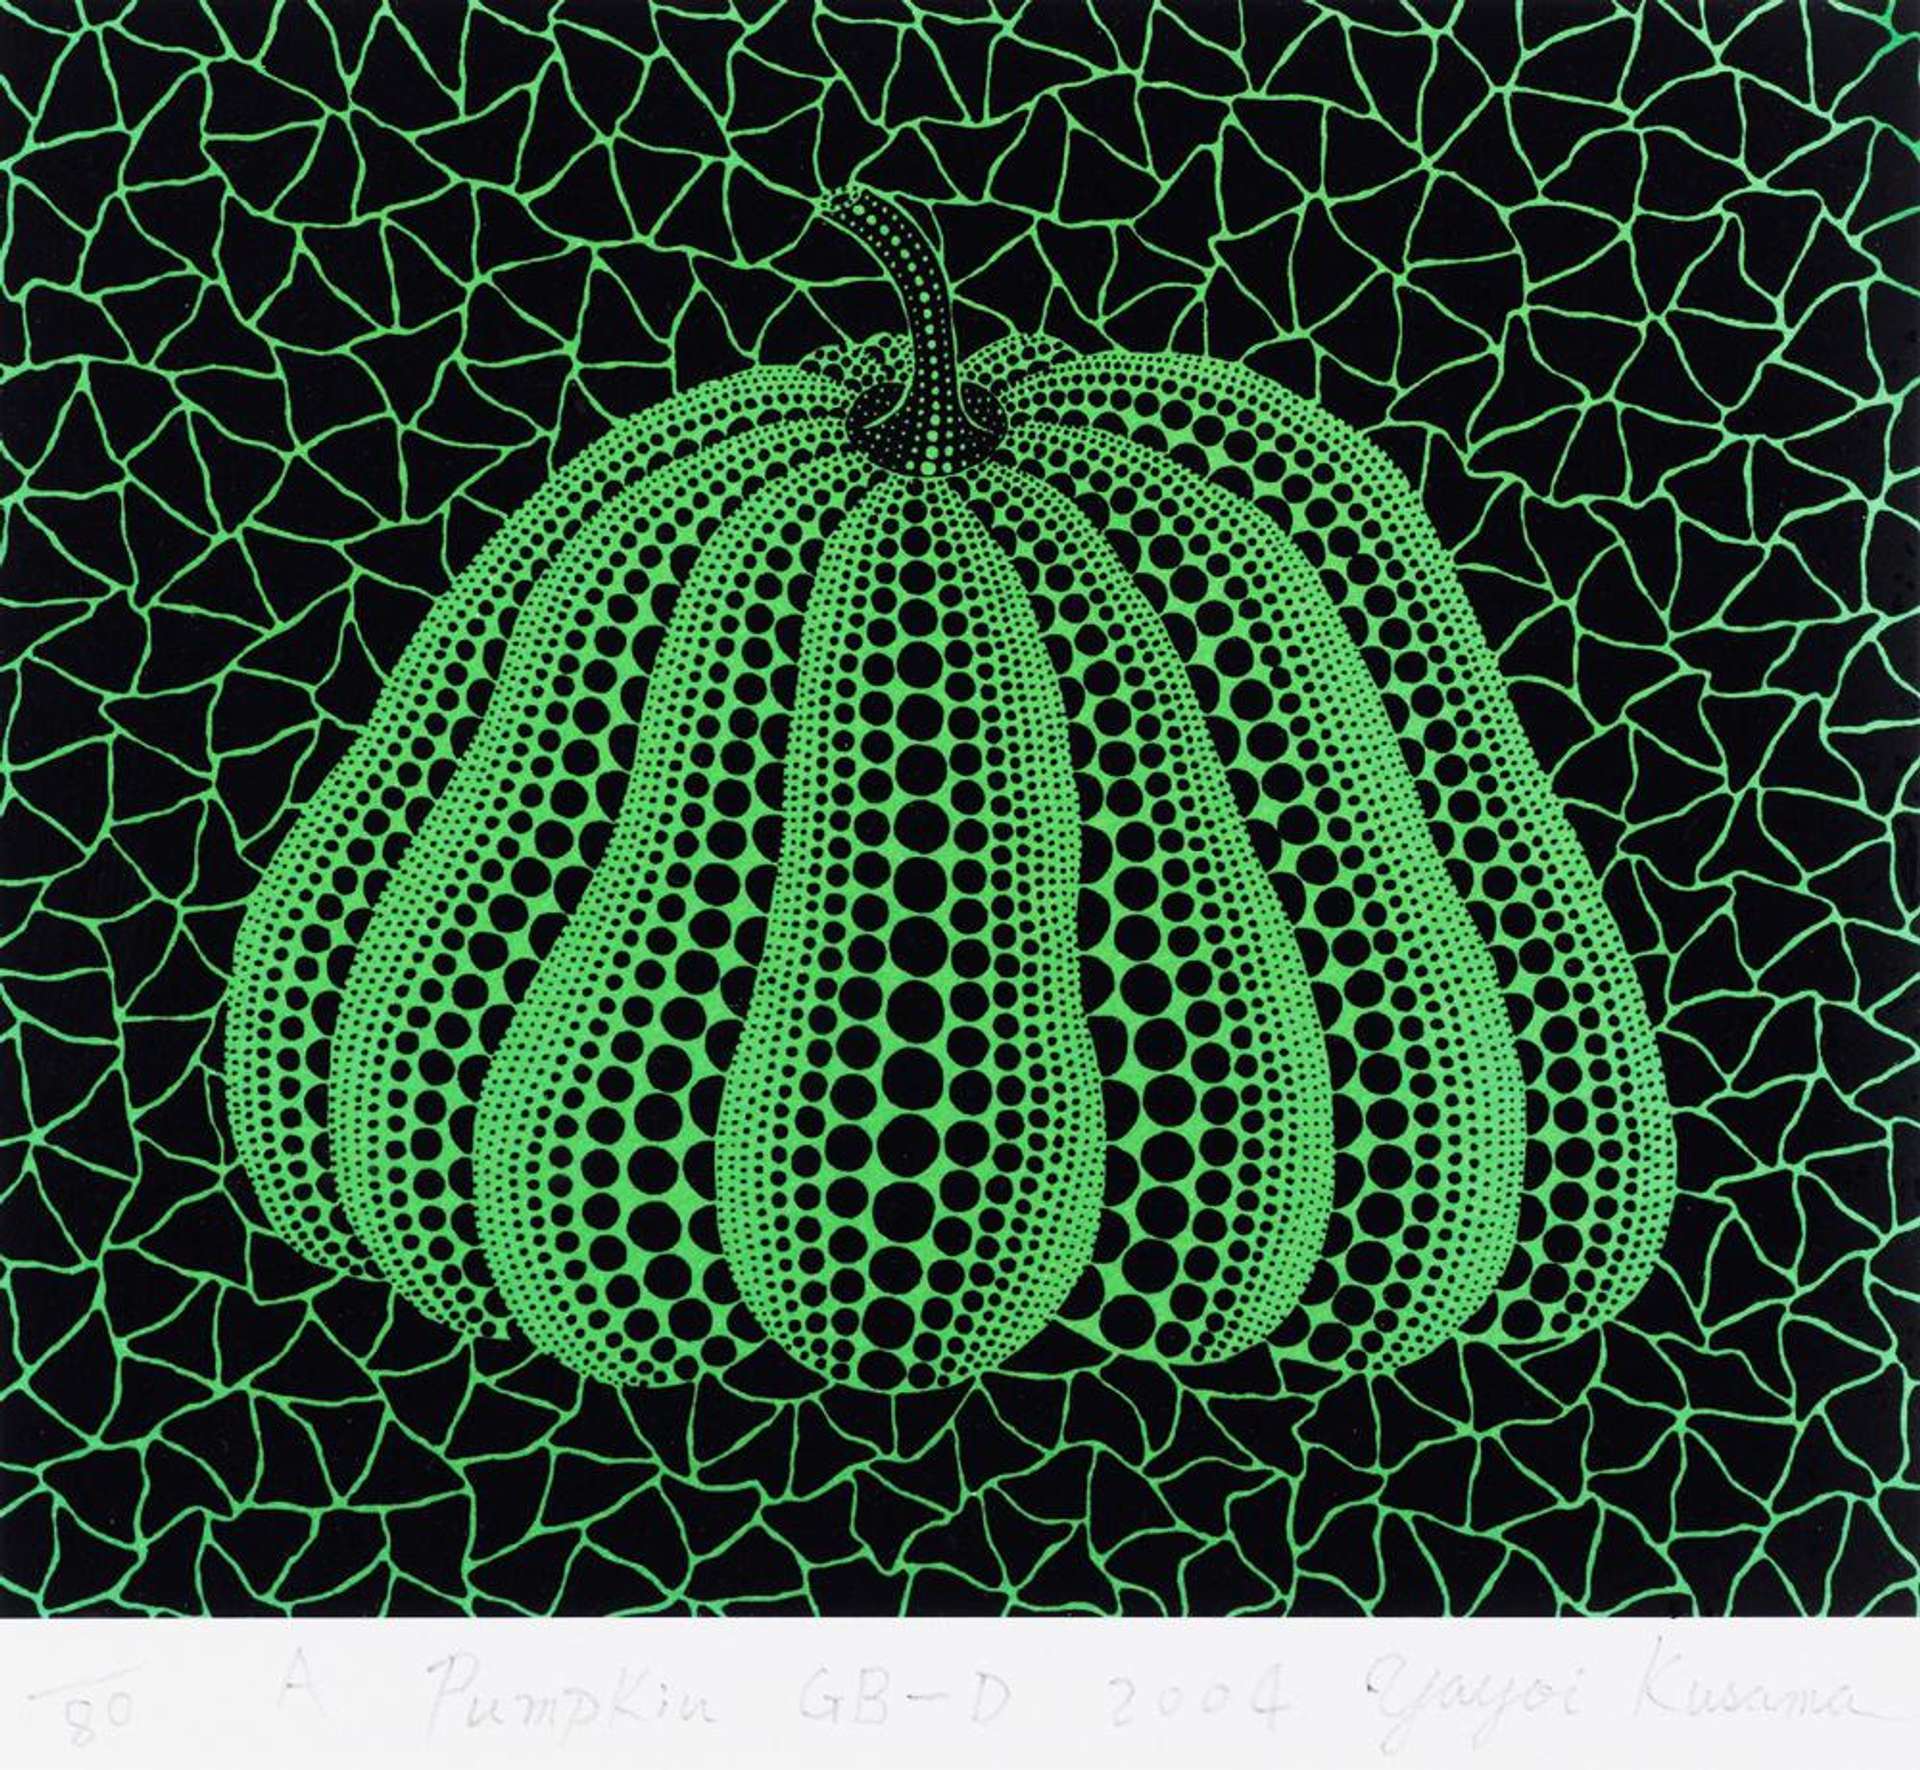 A screenprint of a green pumpkin with black polka dots, set against a geometric pattern of green triangles on a black background